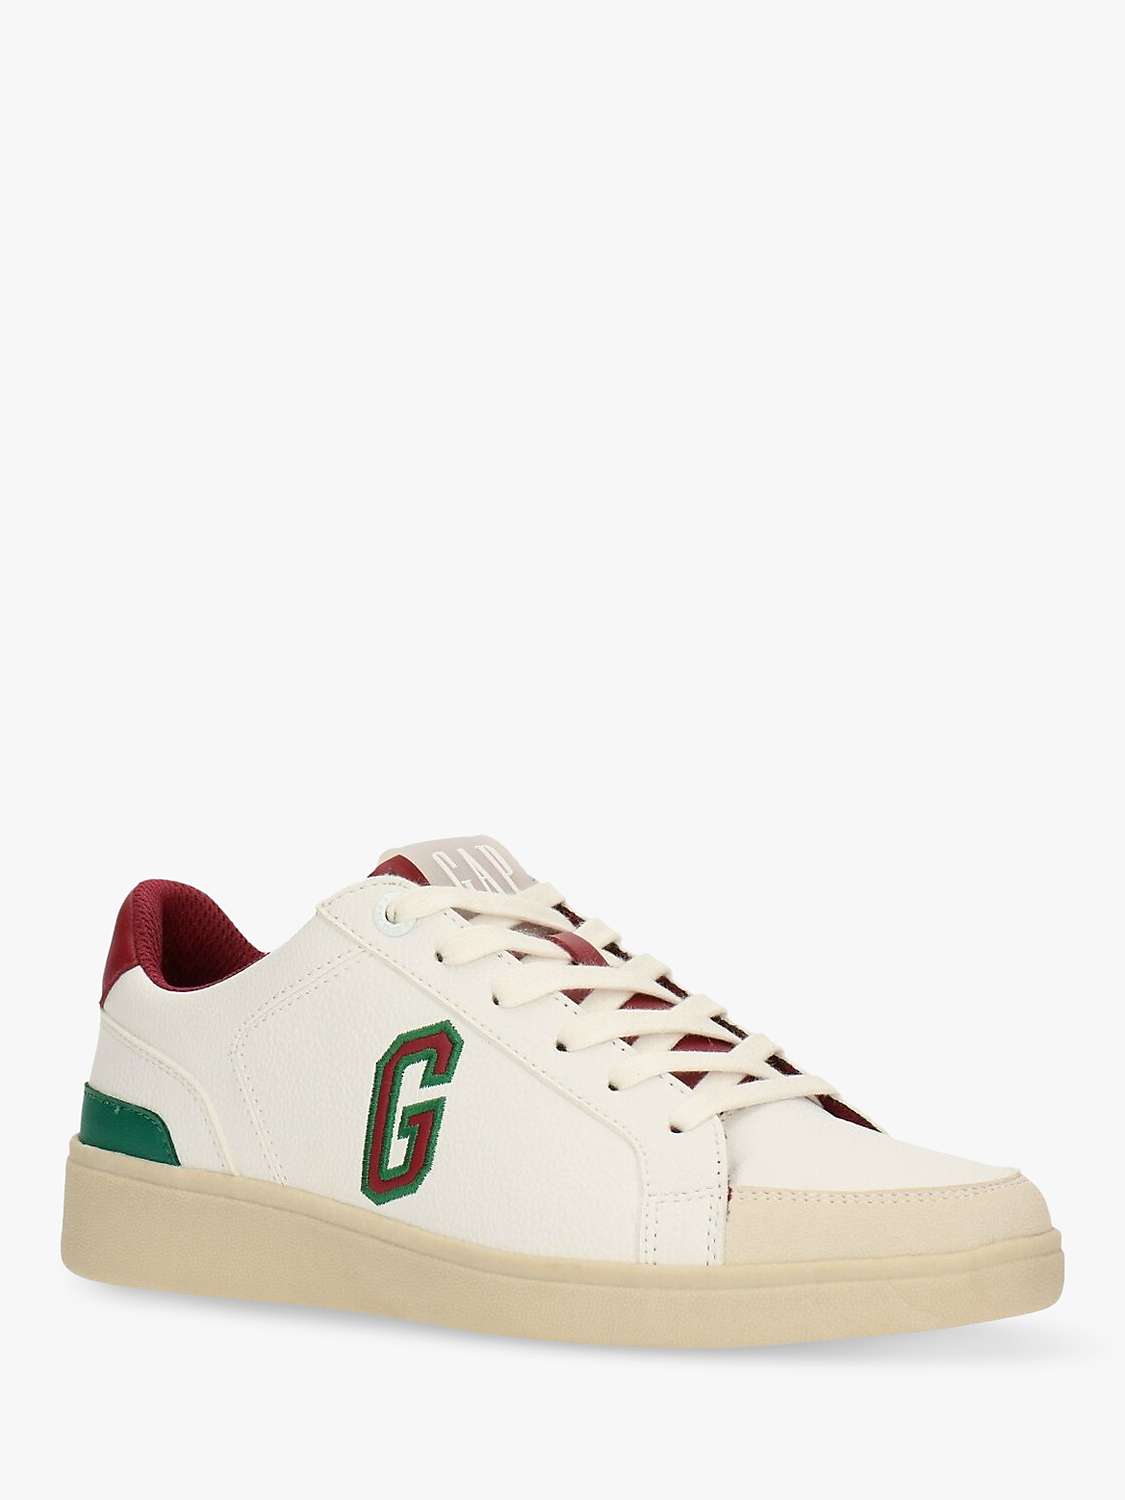 Buy Gap Kids' Seattle II Lace Up Trainers Online at johnlewis.com